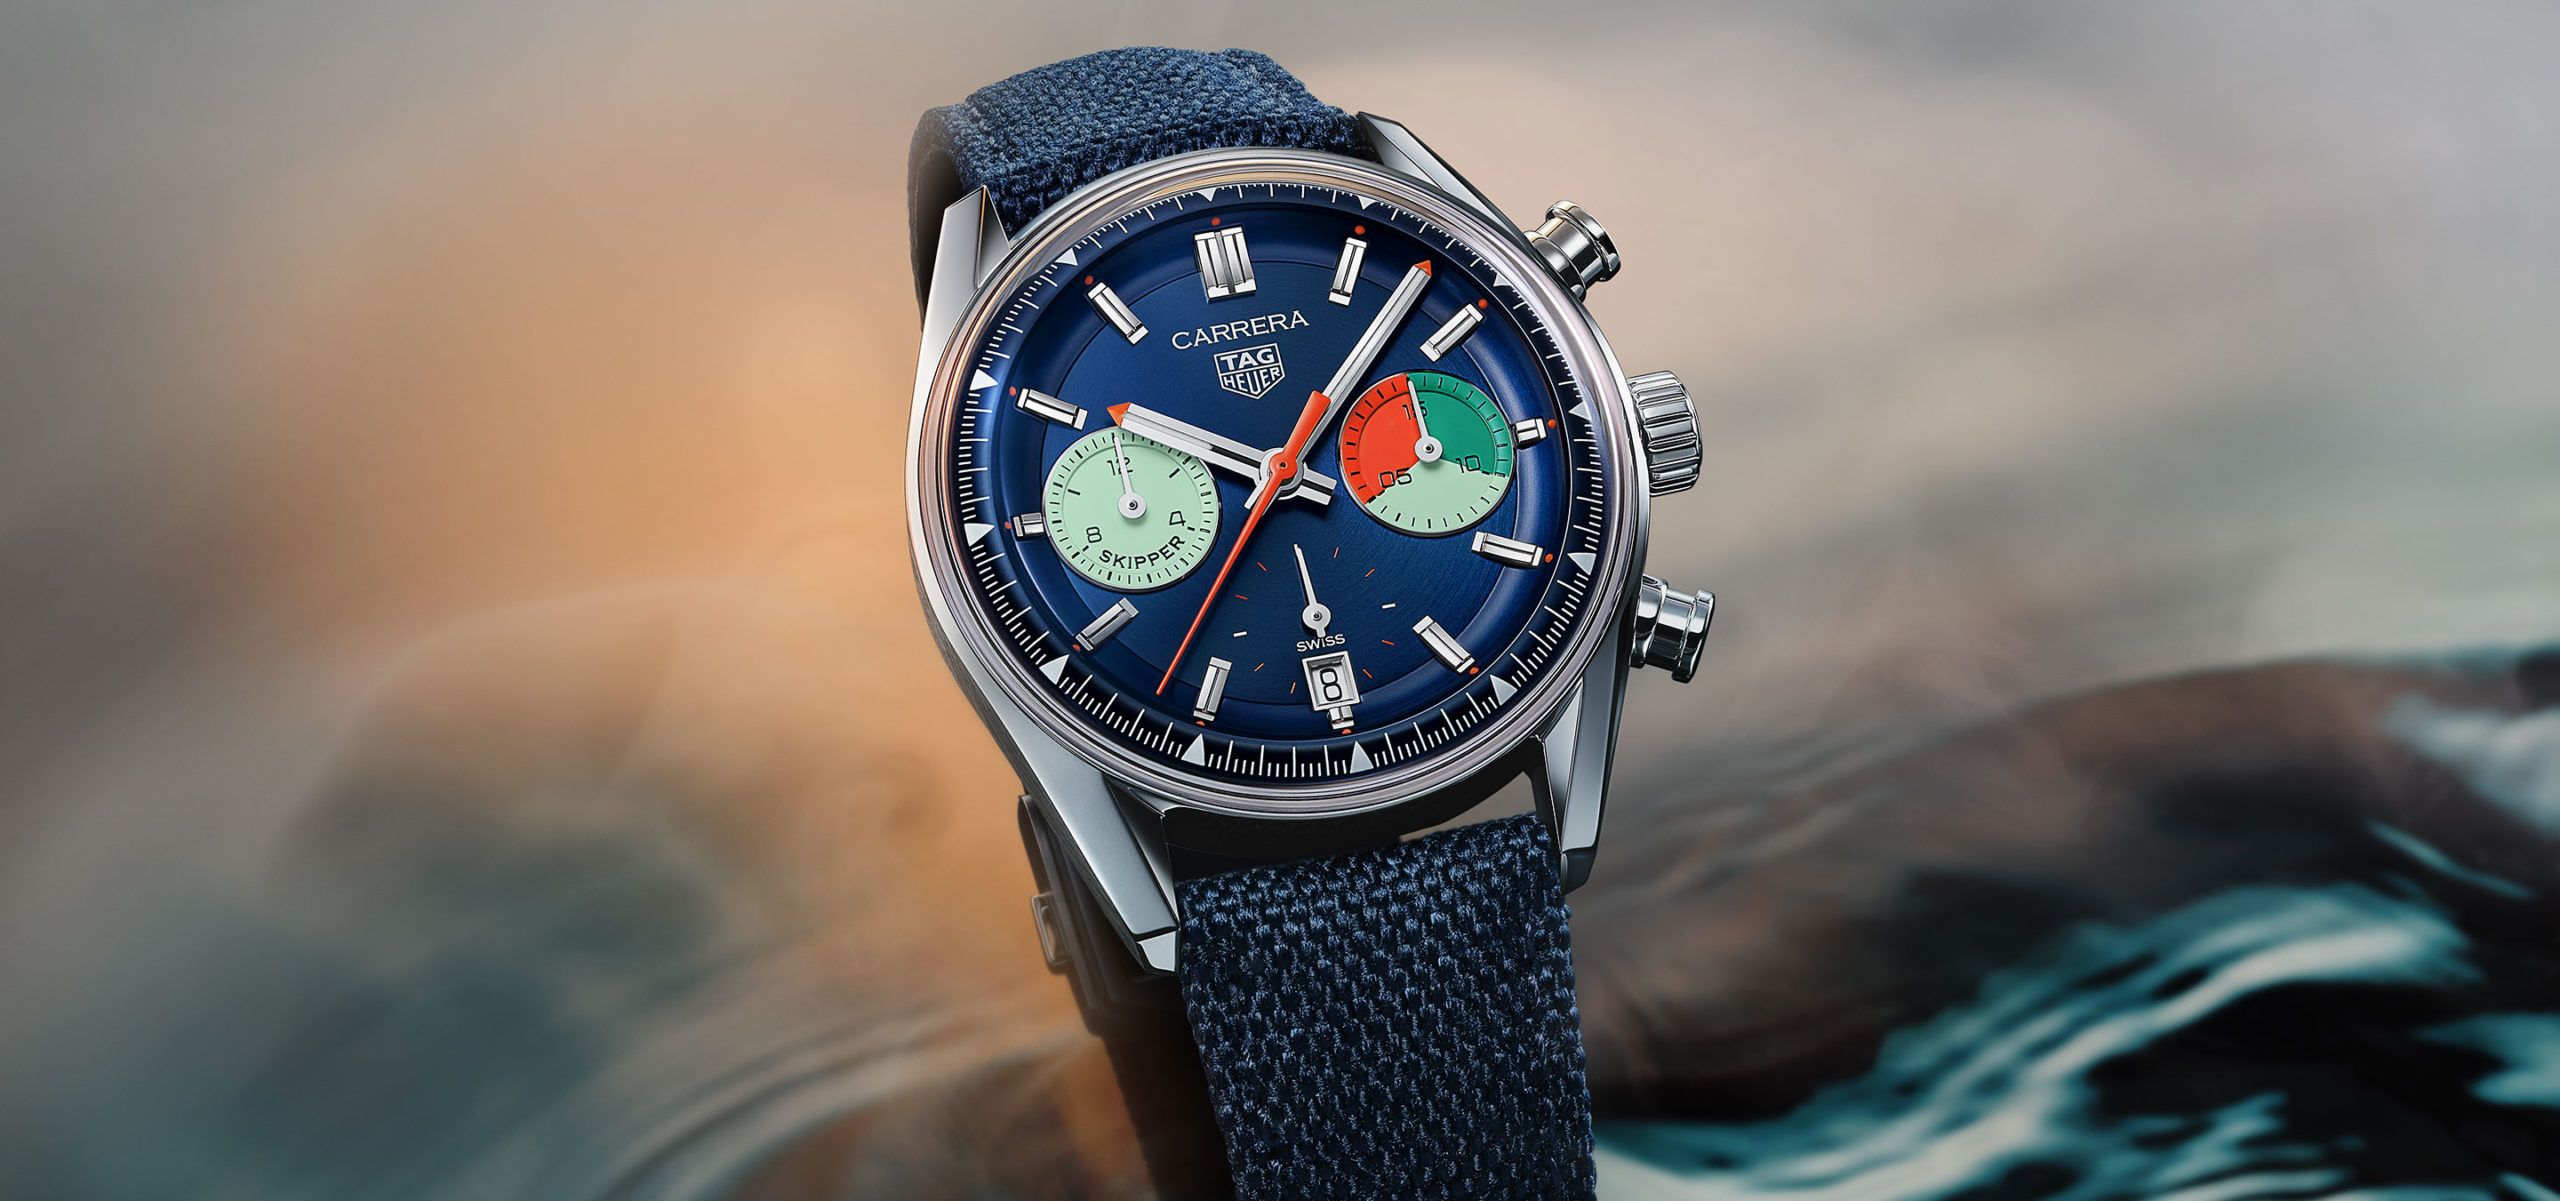 Ahoy There, Captain: TAG Heuer Revives Their Vintage Skipper Watch In A Contemporary Carrera Case